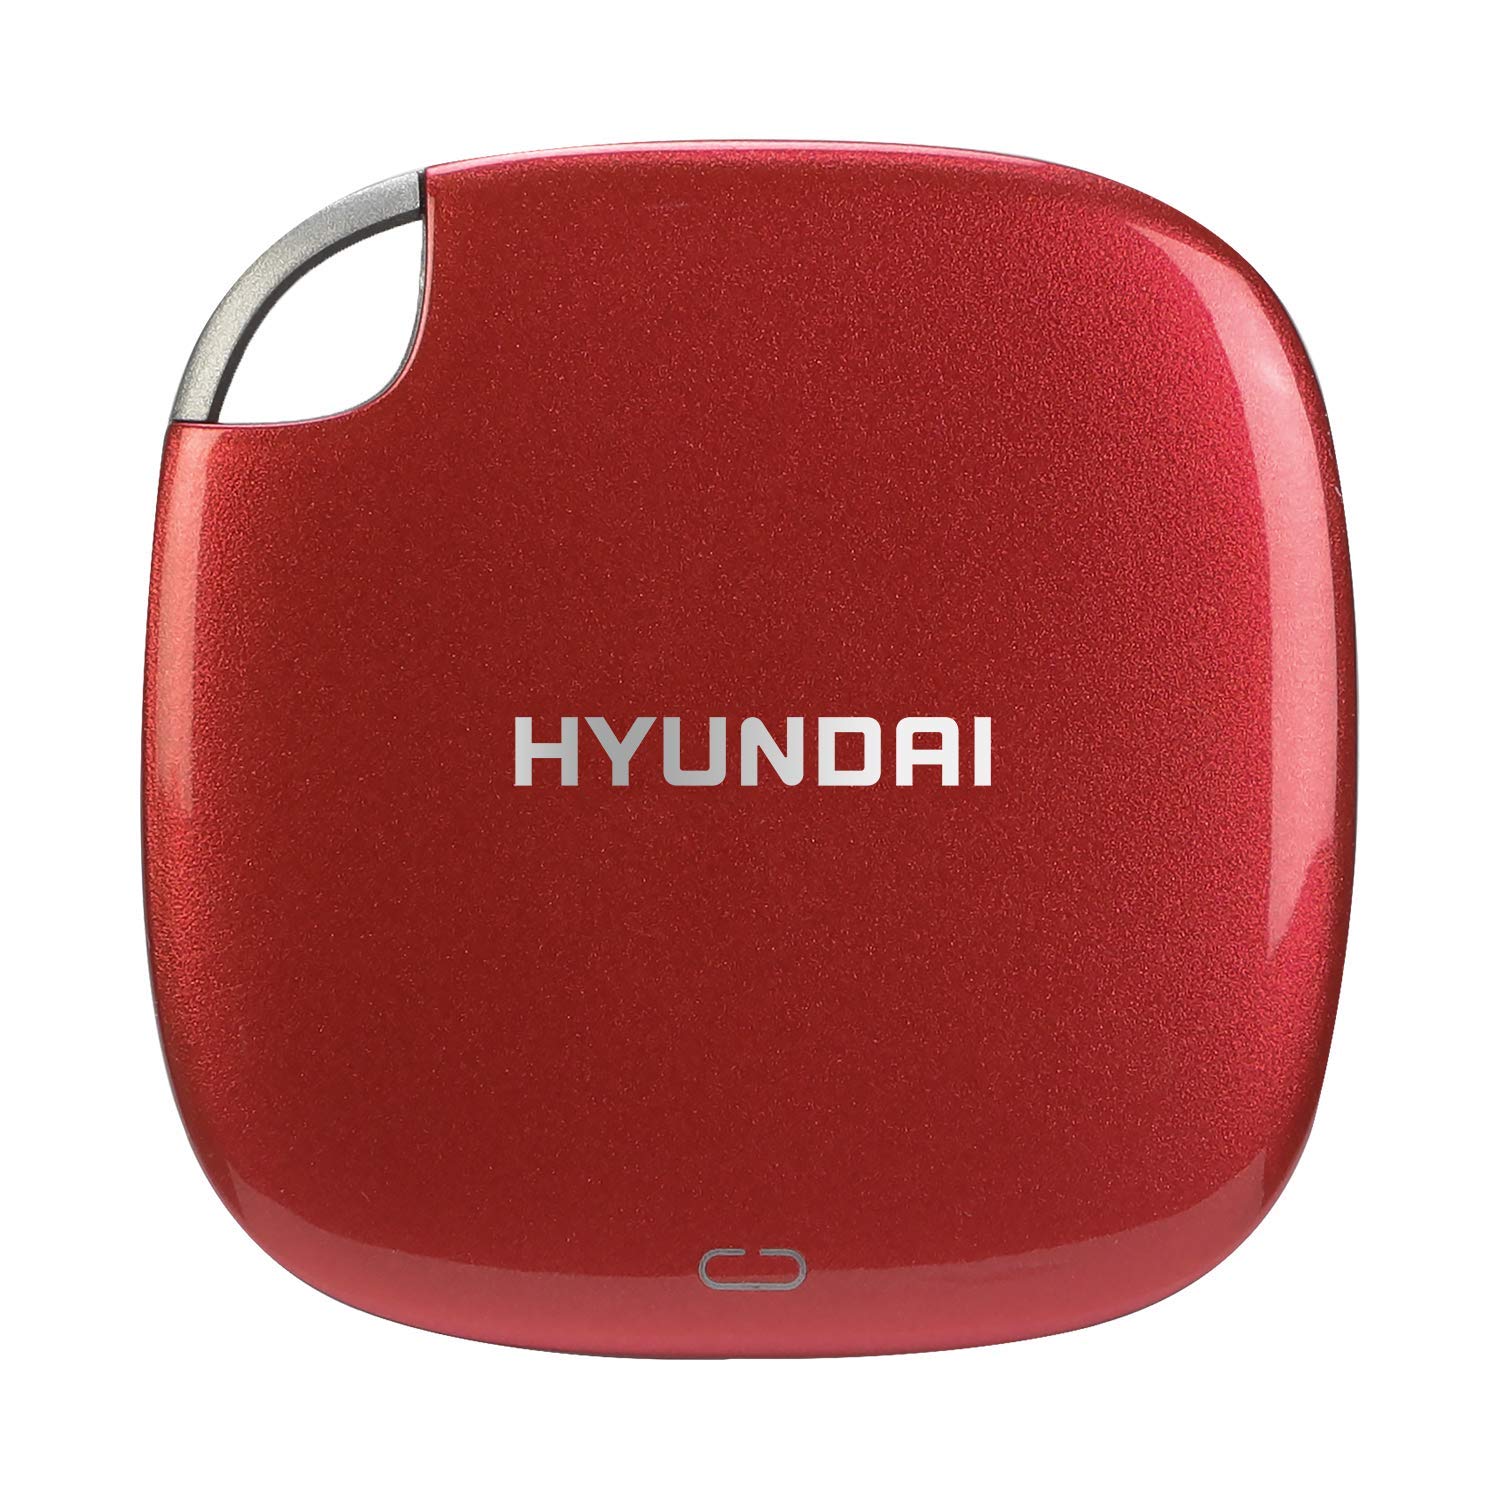 Hyundai 512GB Ultra-Portable Data Storage, Fast External SSD, PC/MAC/Mobile - USB-C to C, USB-A to C, Dual Cable Included, Up to 450MB/s - Gen USB 3.1, Red HTESD500R UPC 810033033223 - HTESD500R